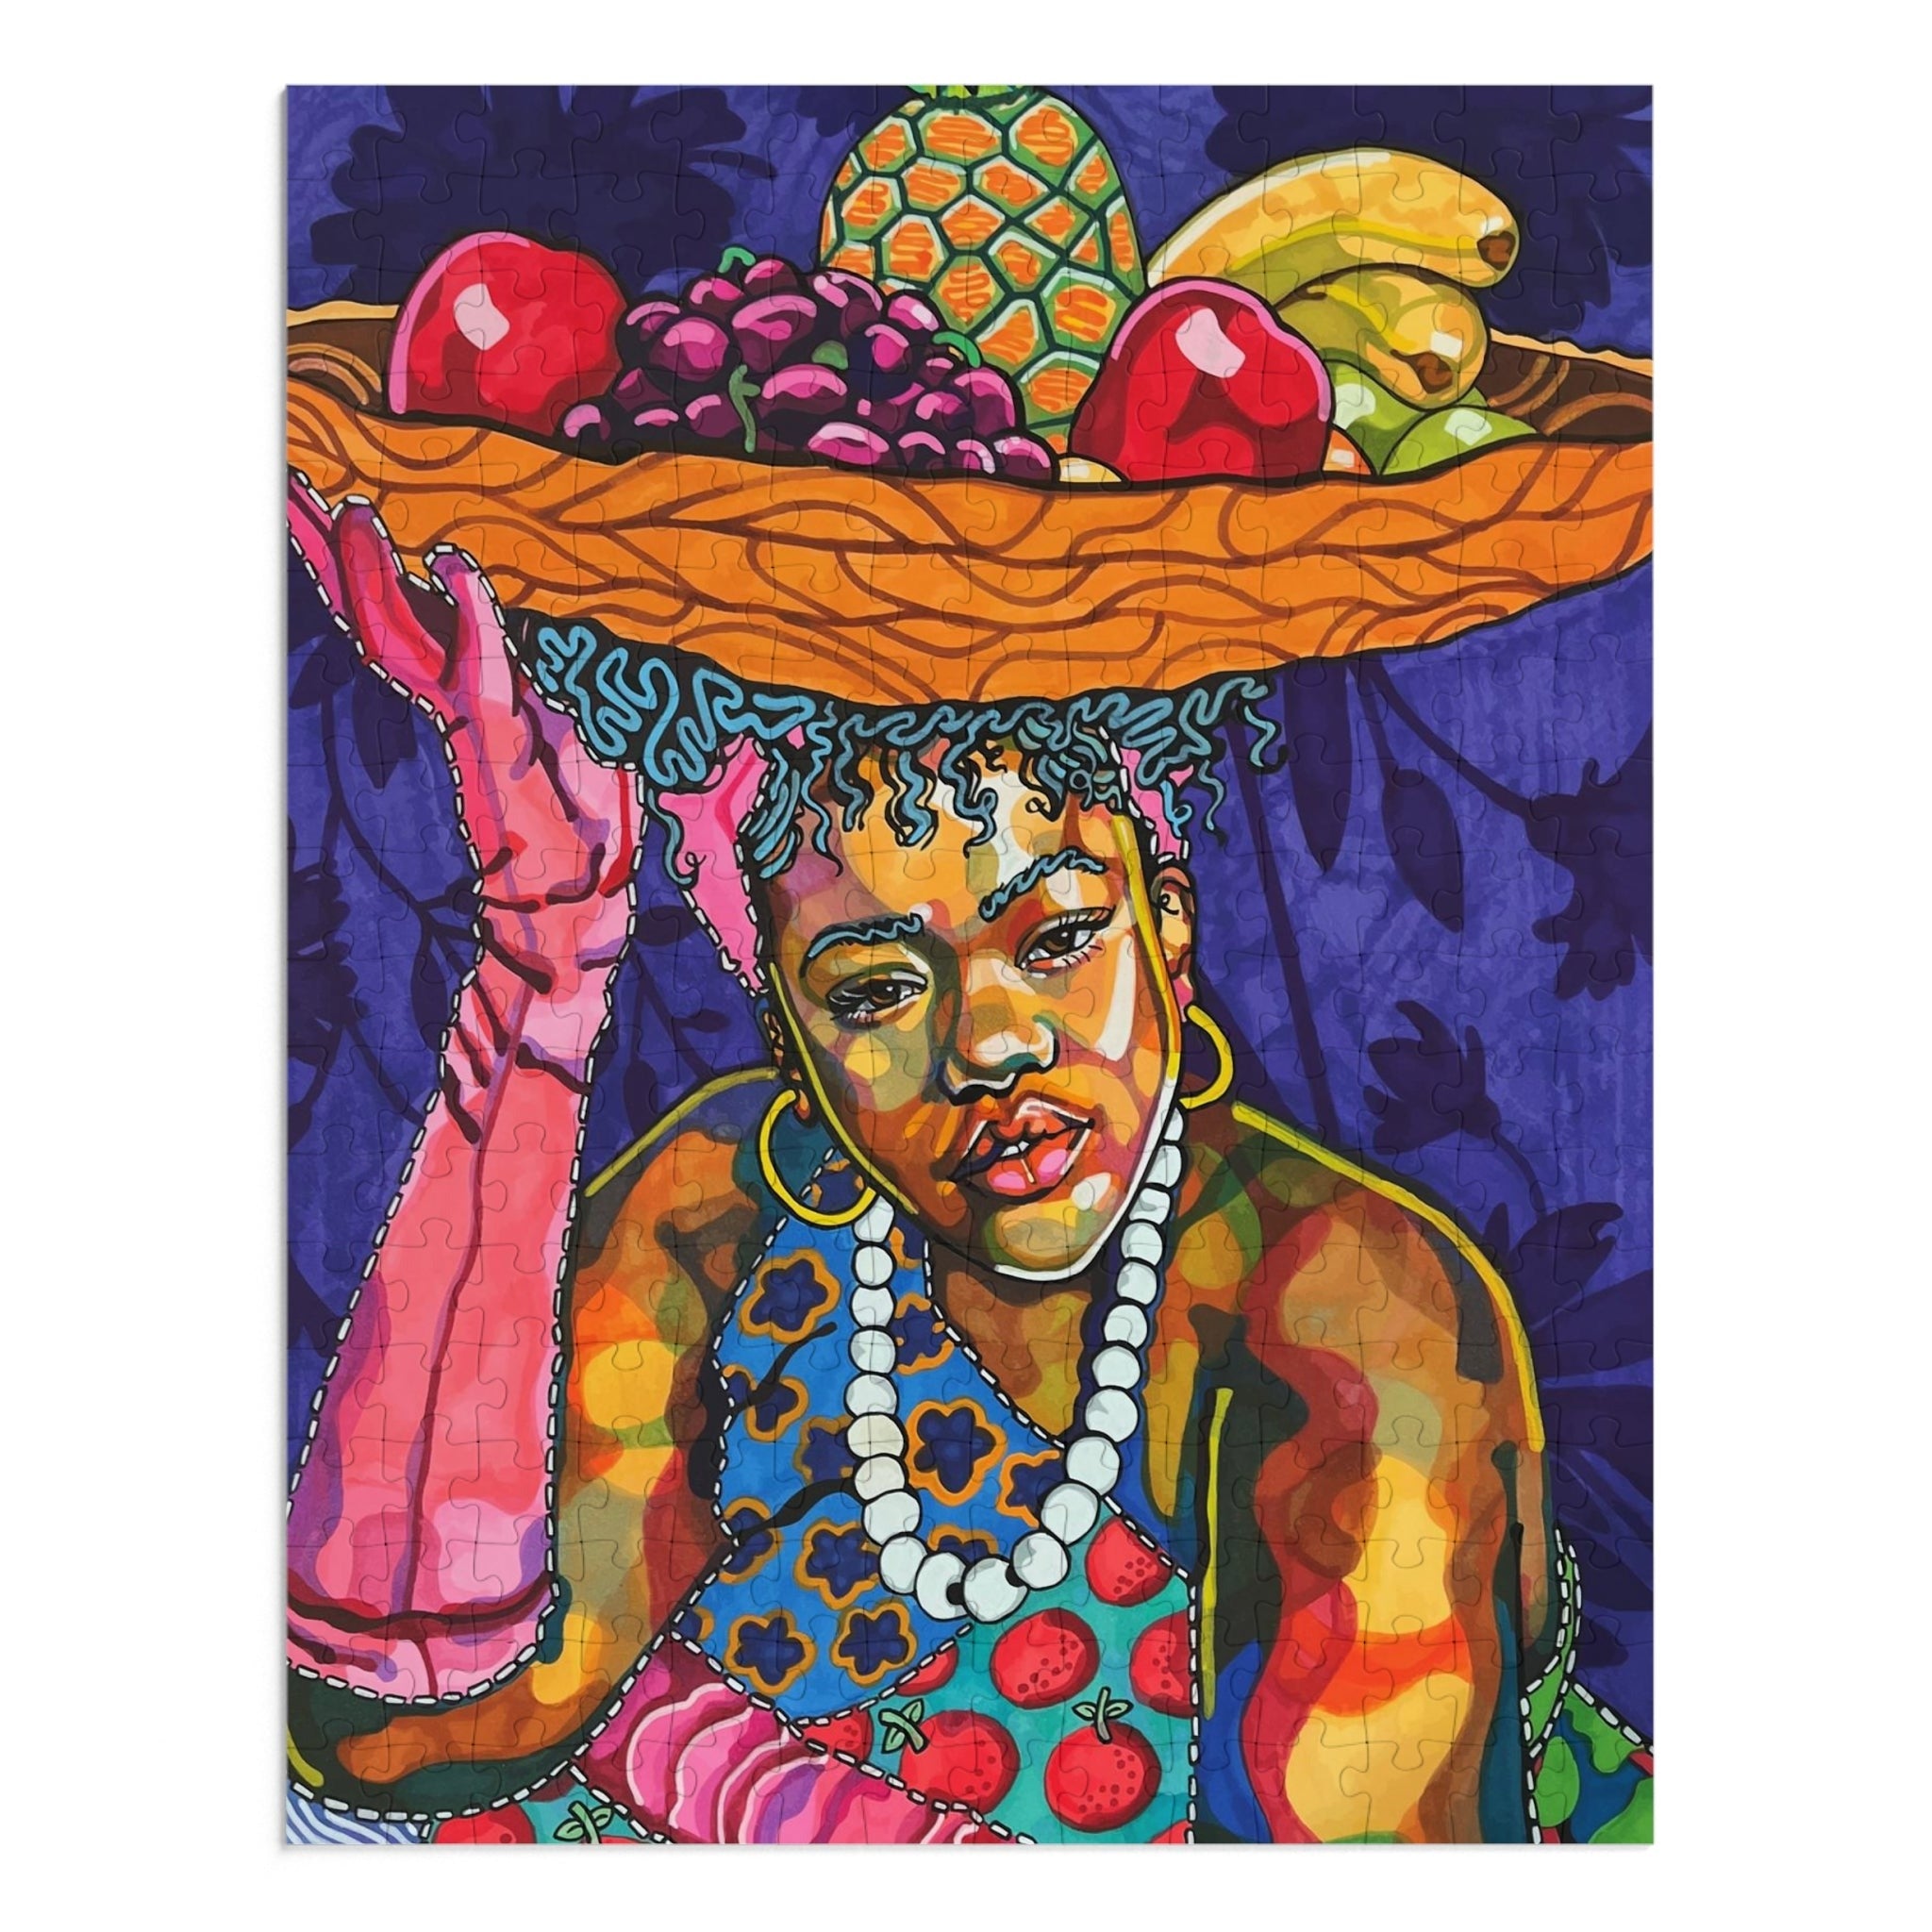 "Blacker the Berry" Jigsaw Puzzle